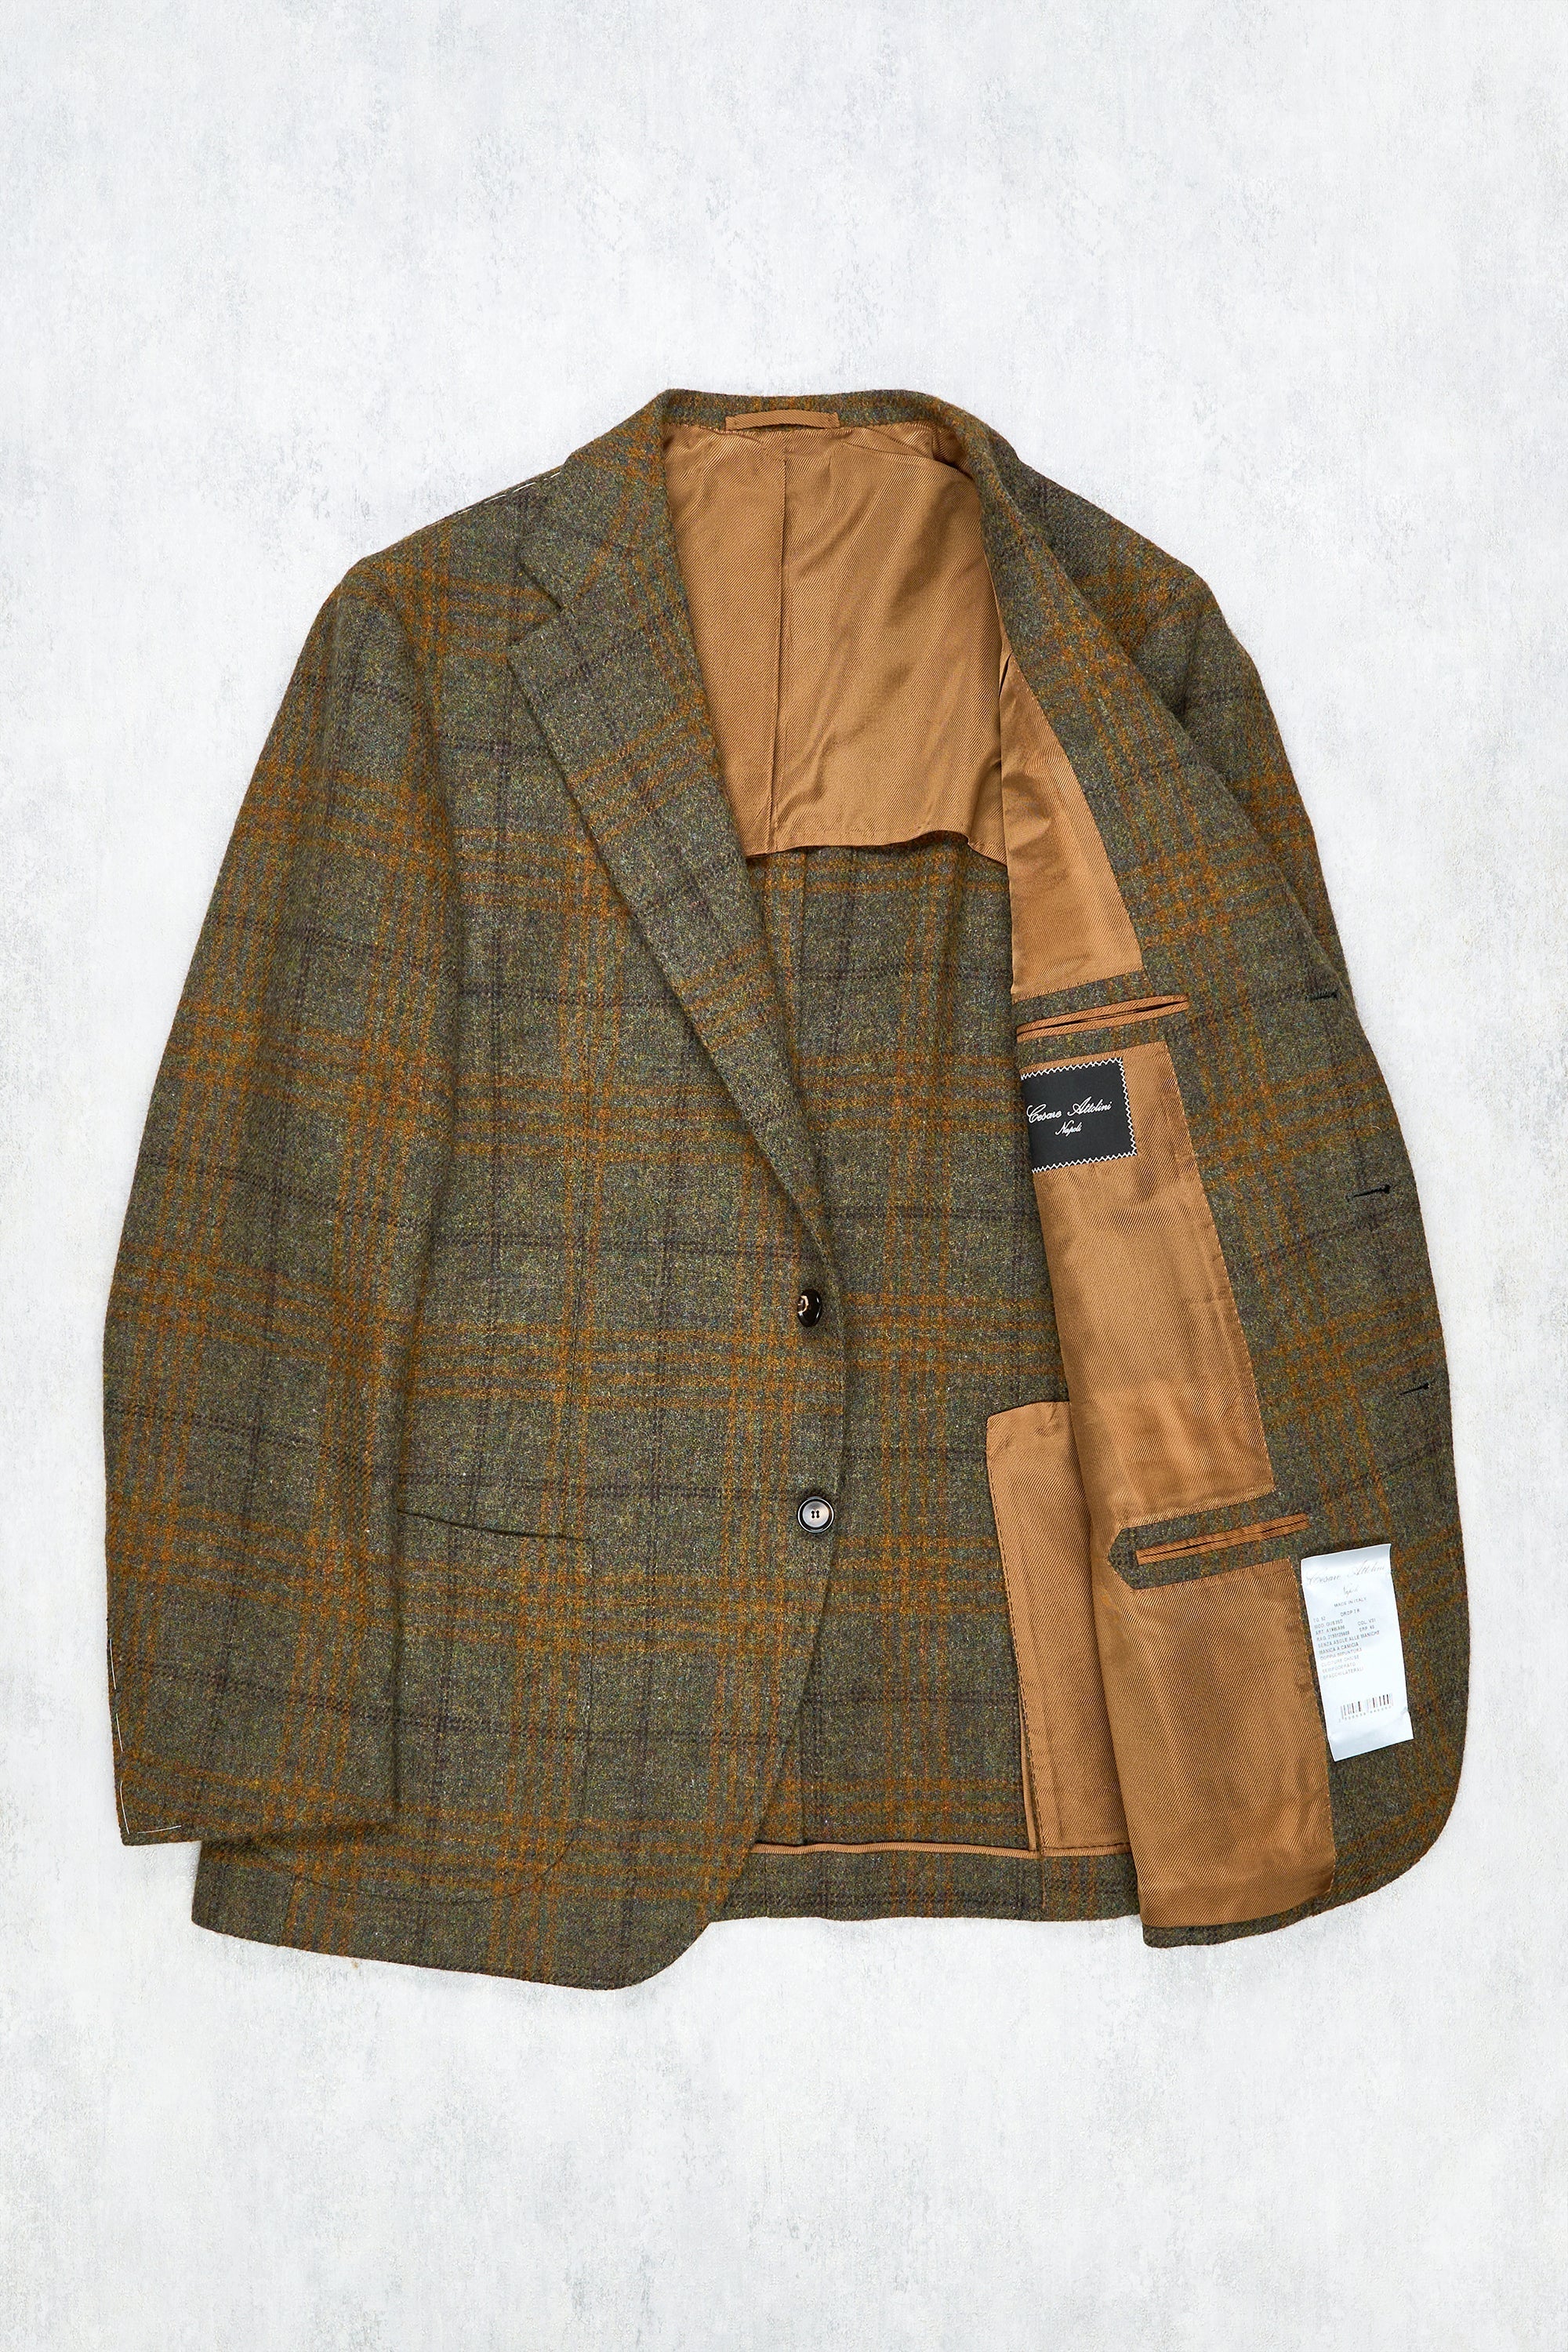 Cesare Attolini Forest Green with Orange/Brown Tweed Check Sport Coat